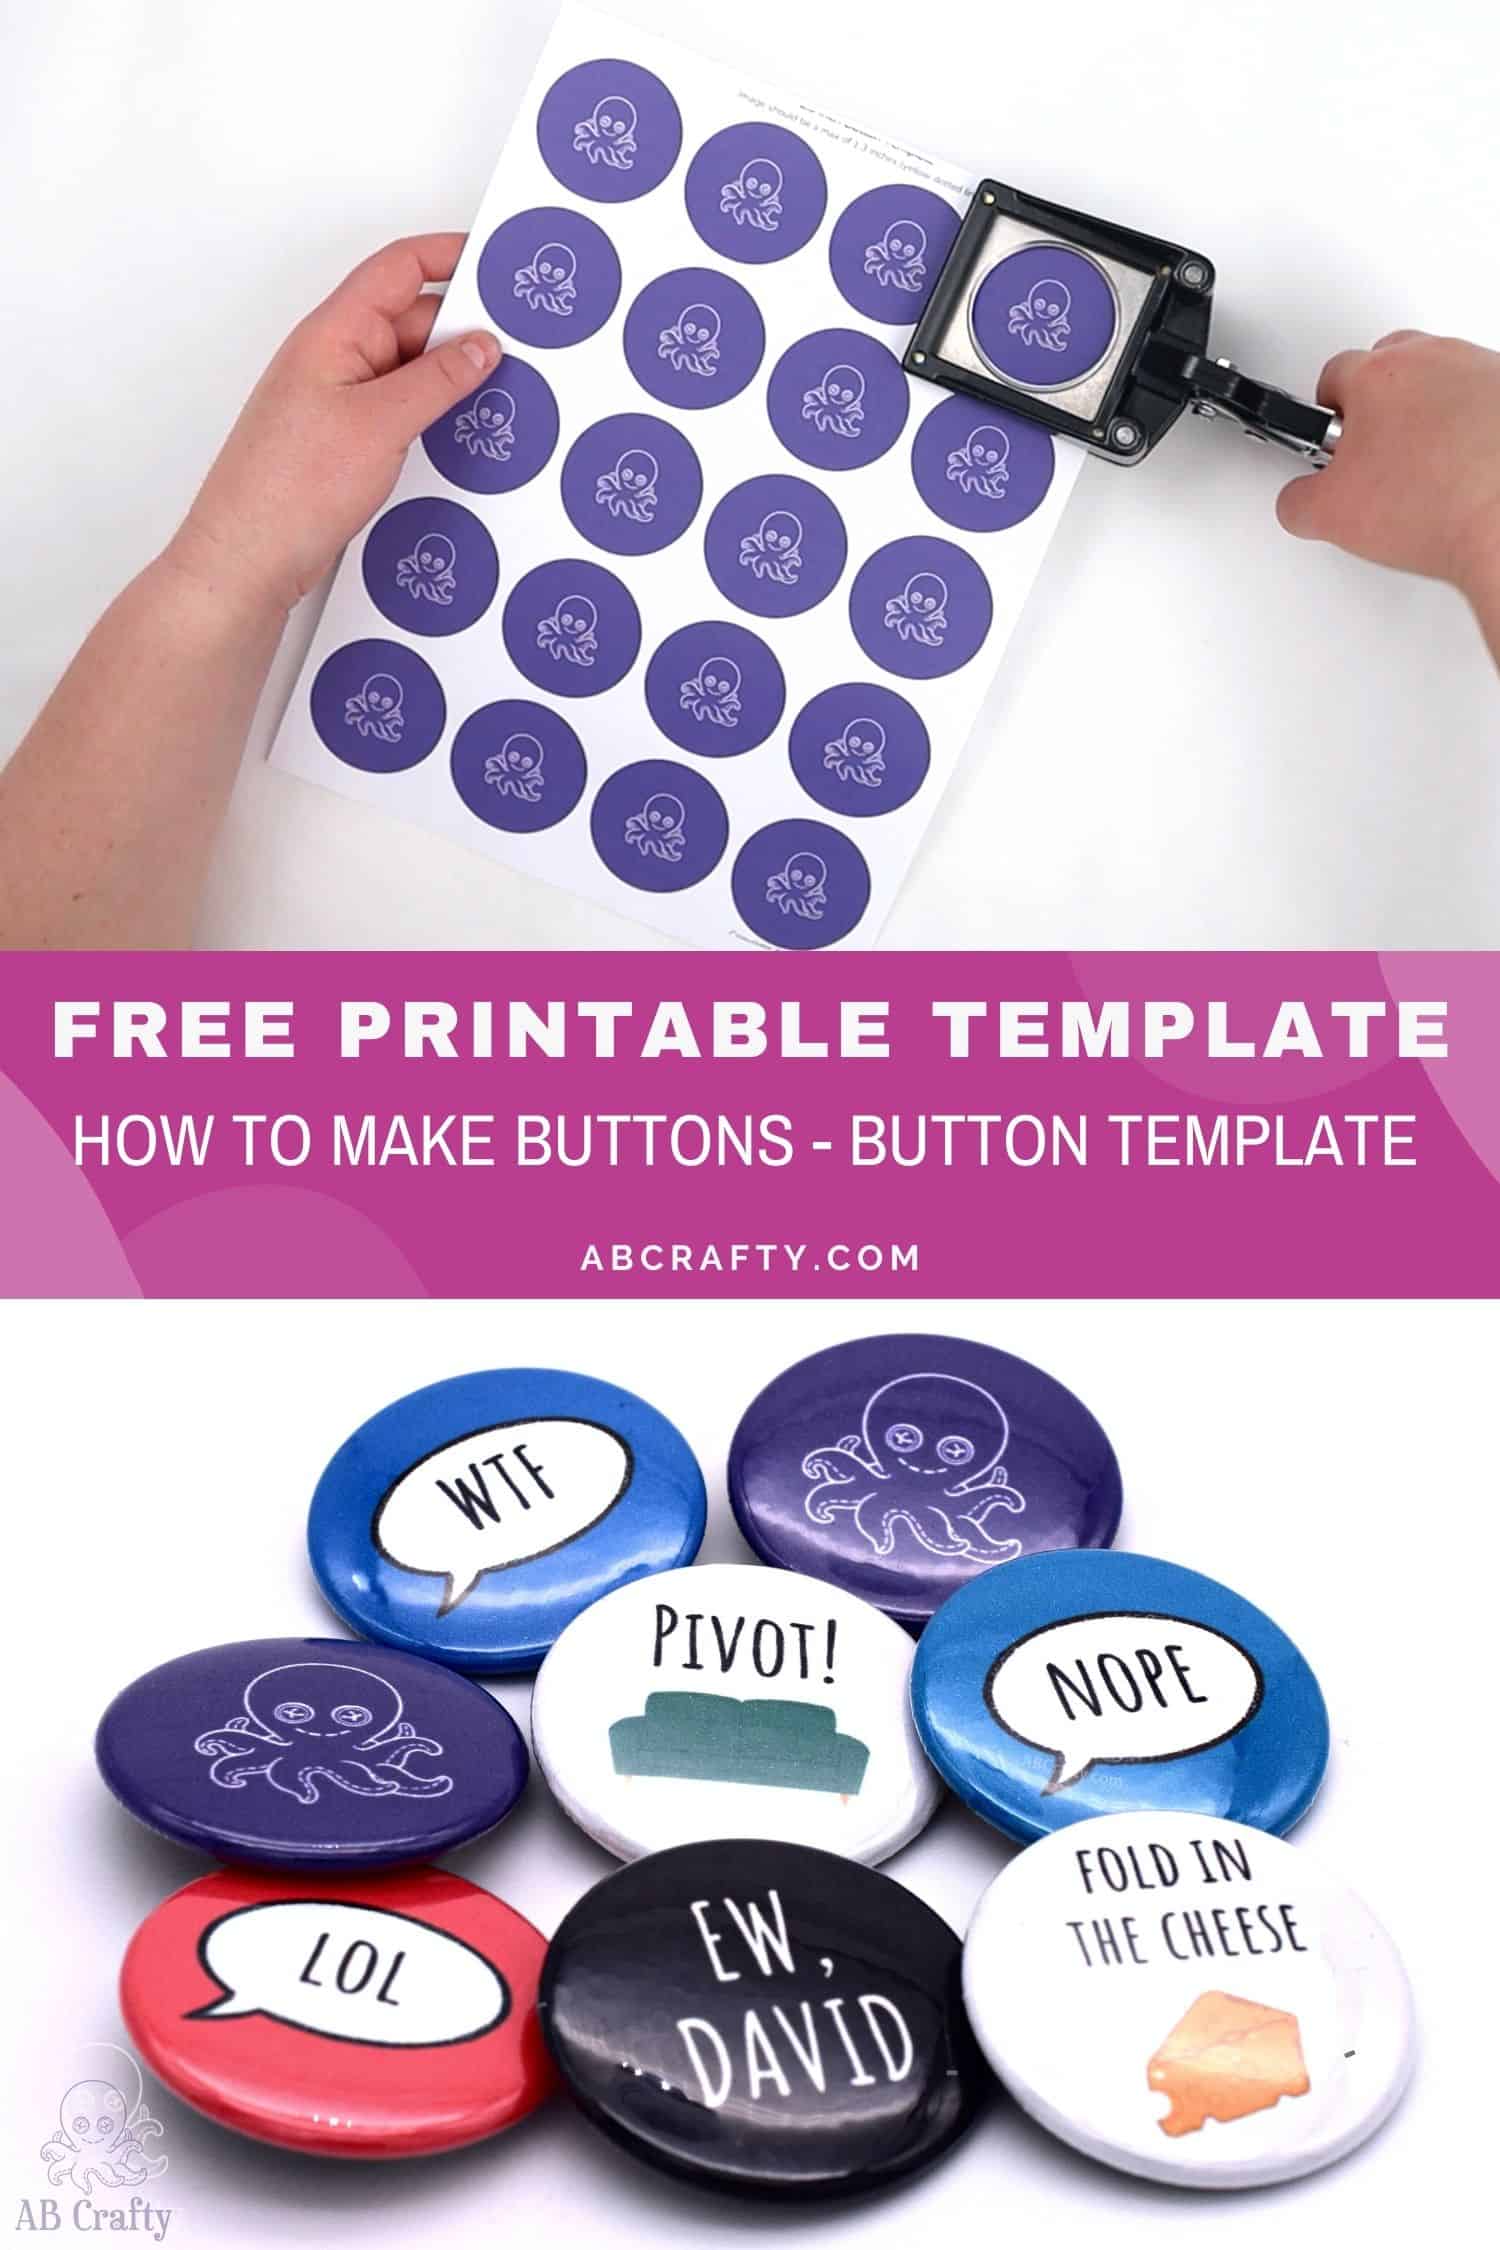 Button Template in 4 Sizes - Free Download - AB Crafty